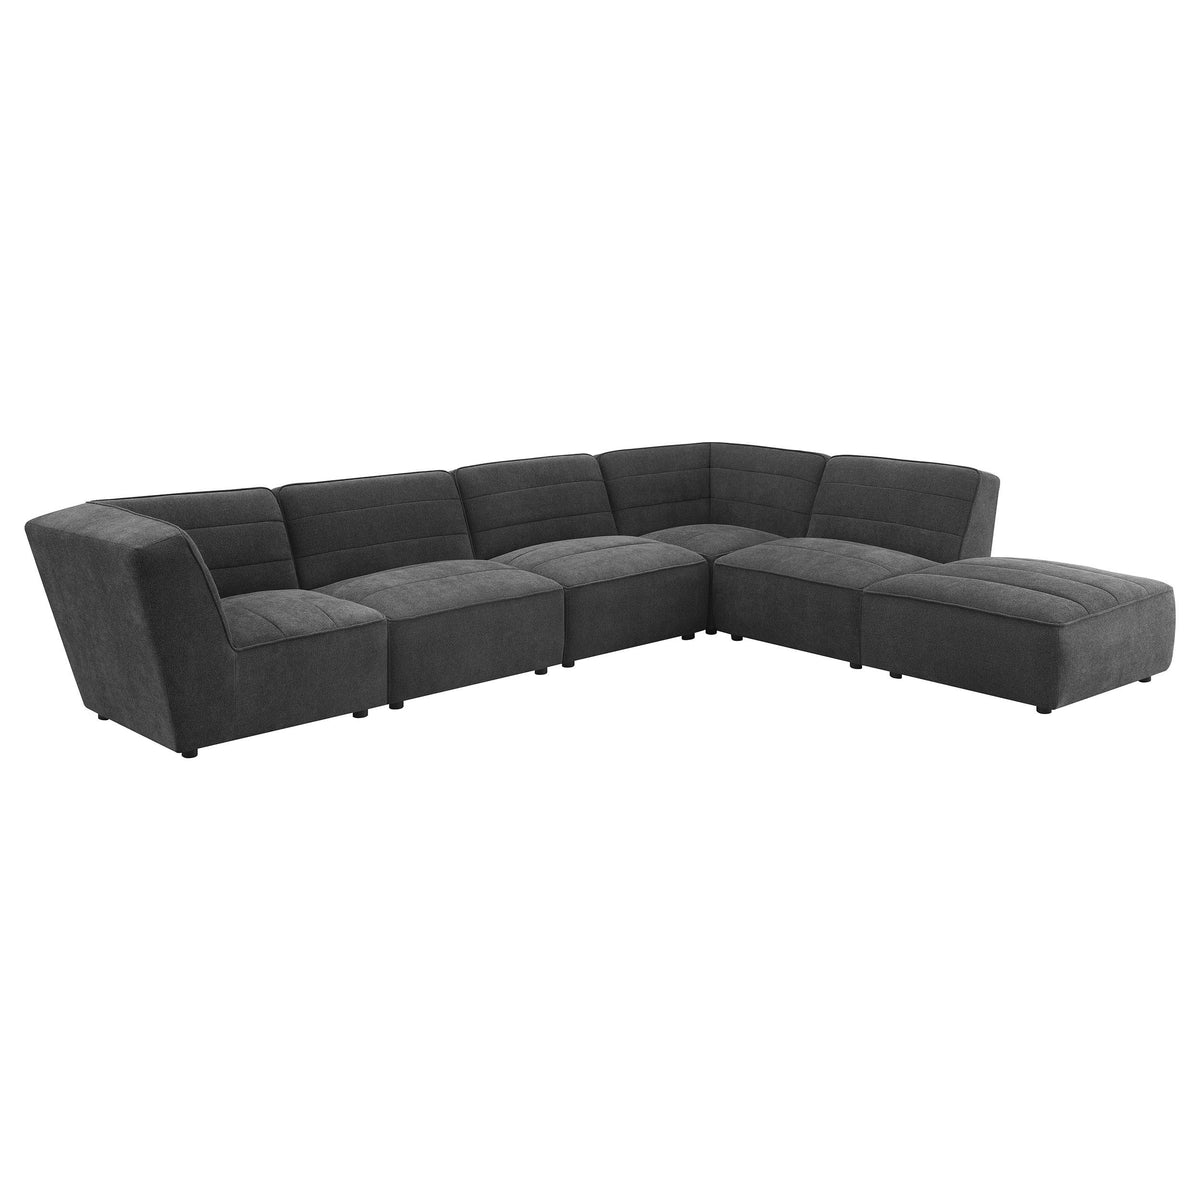 Sunny Upholstered 6-piece Modular Sectional Dark Charcoal  Half Price Furniture